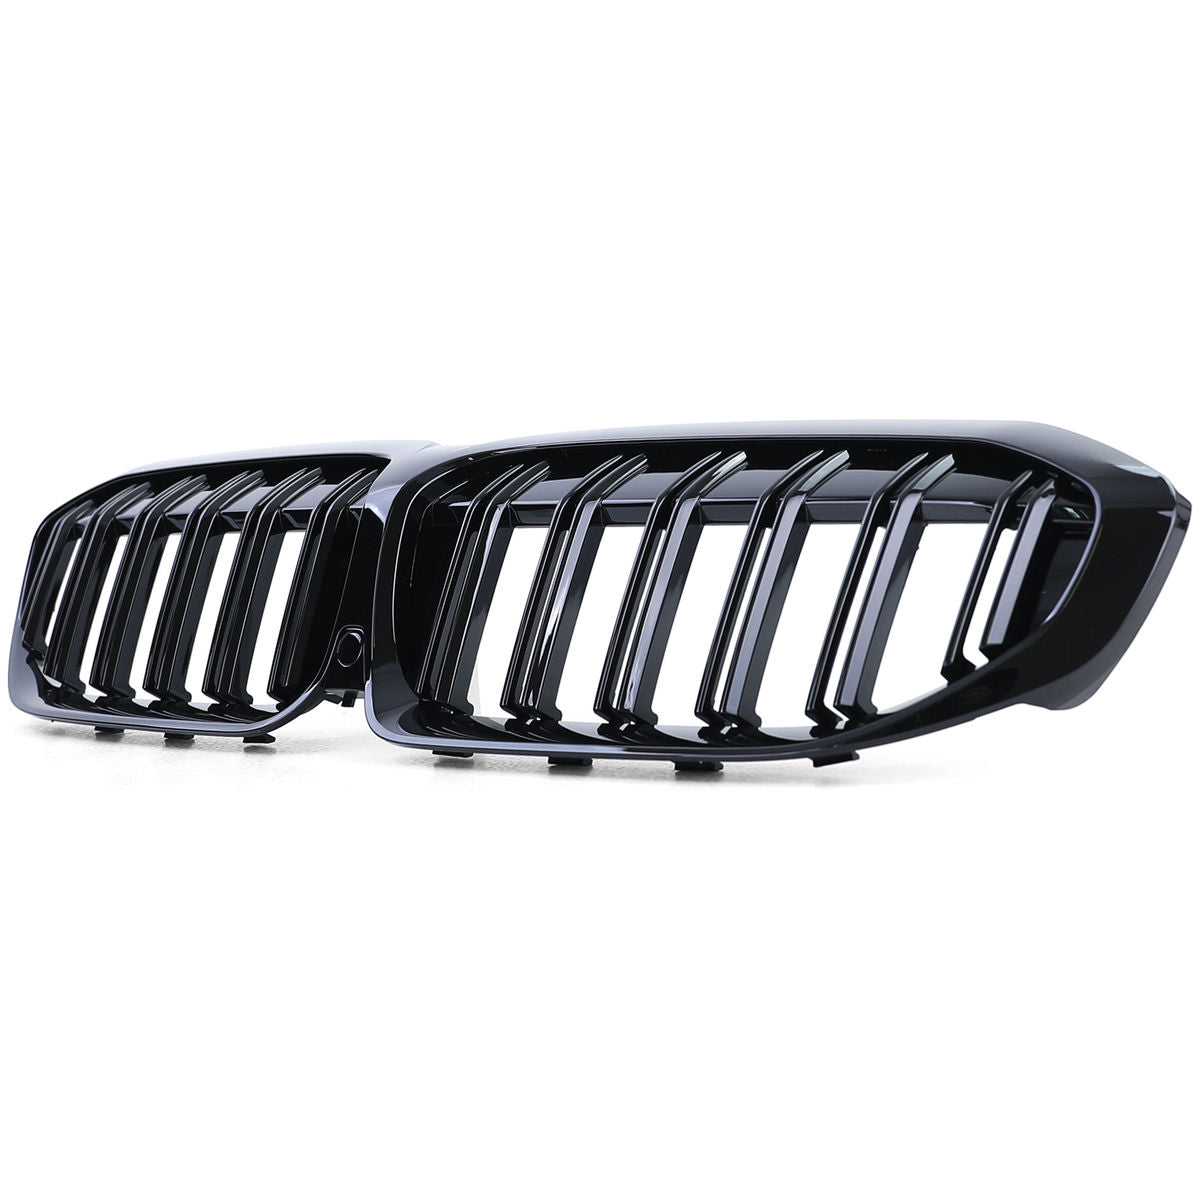 Bmw g20 g21 frontgrill